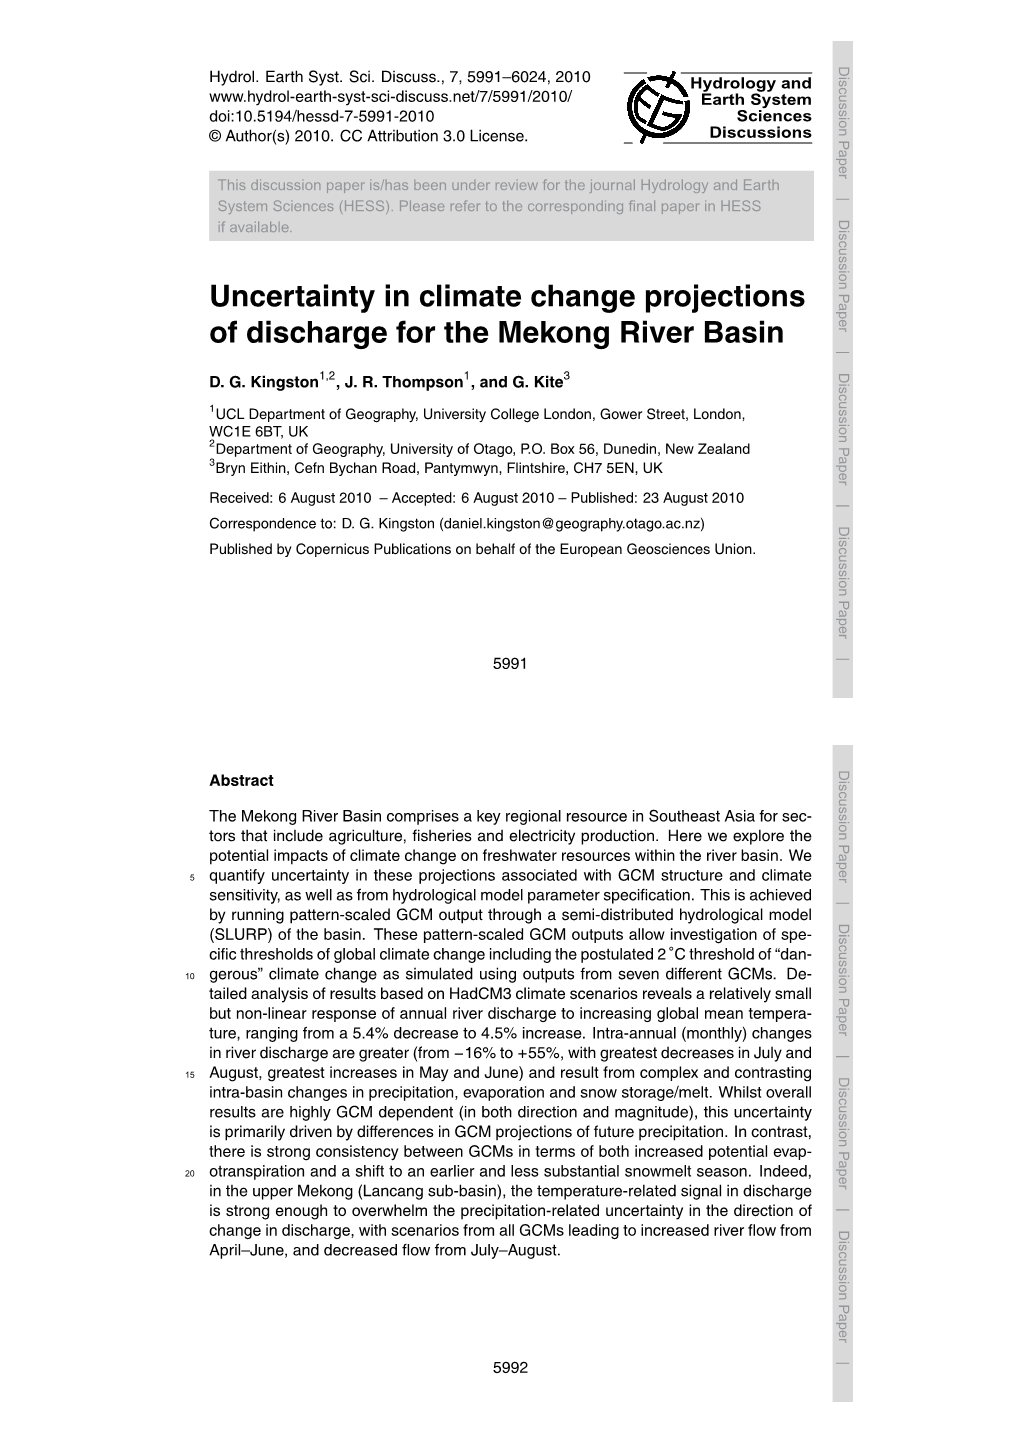 Uncertainty in Climate Change Projections of Discharge for the Mekong Riverd